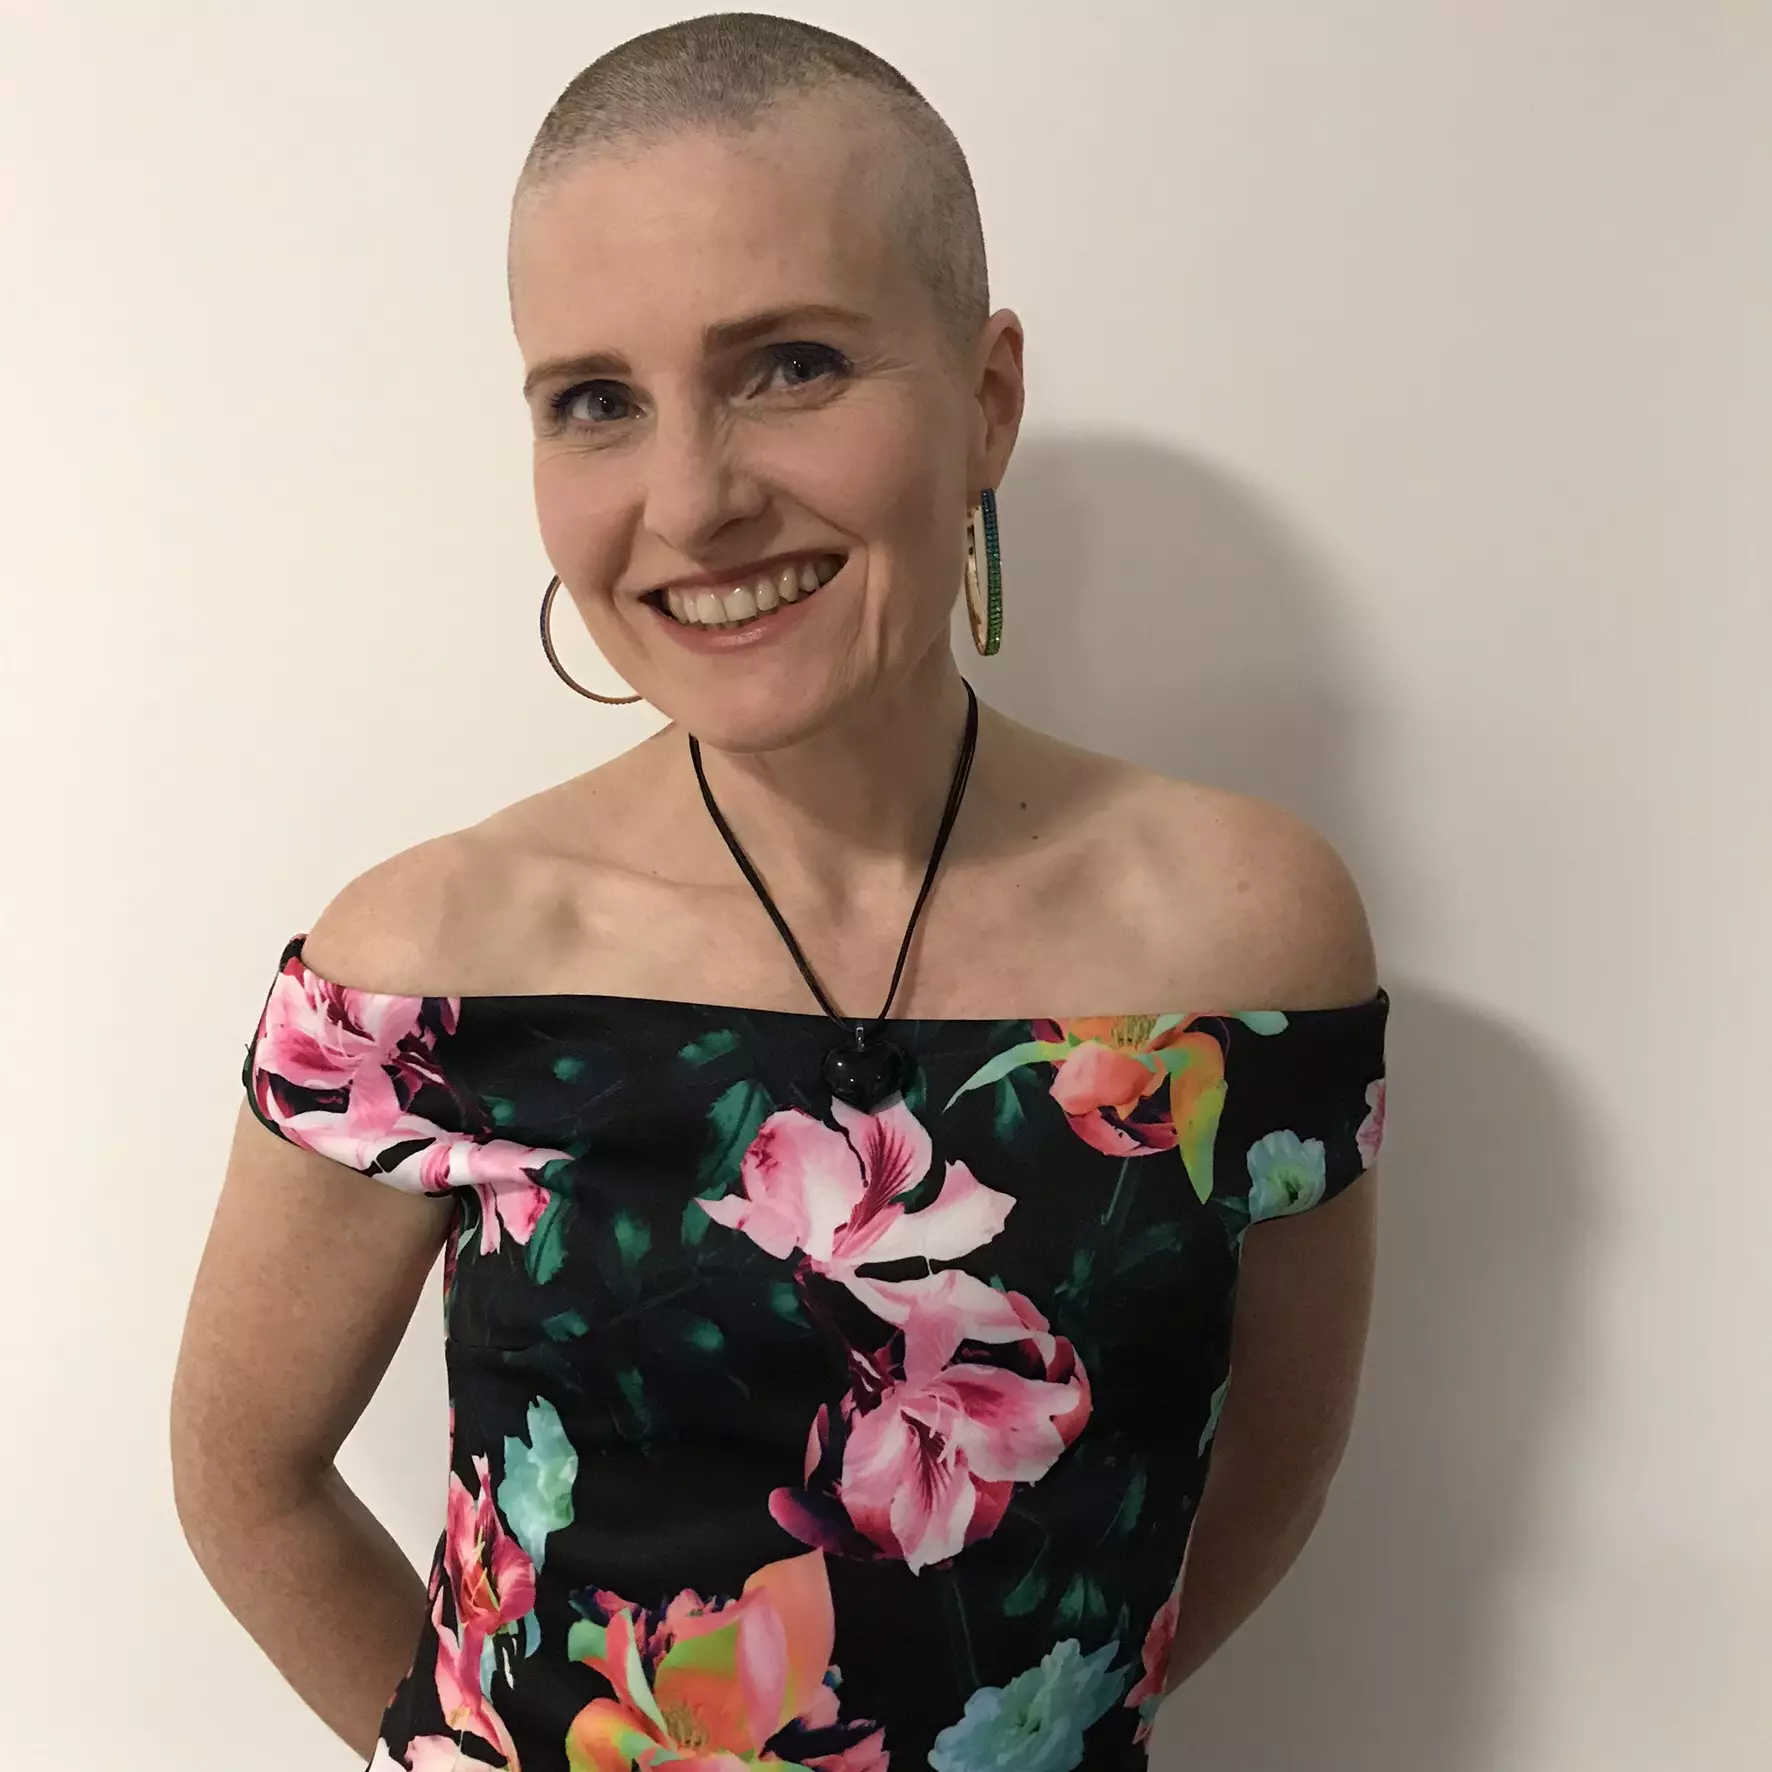 She had to shave her hair while undergoing chemotherapy